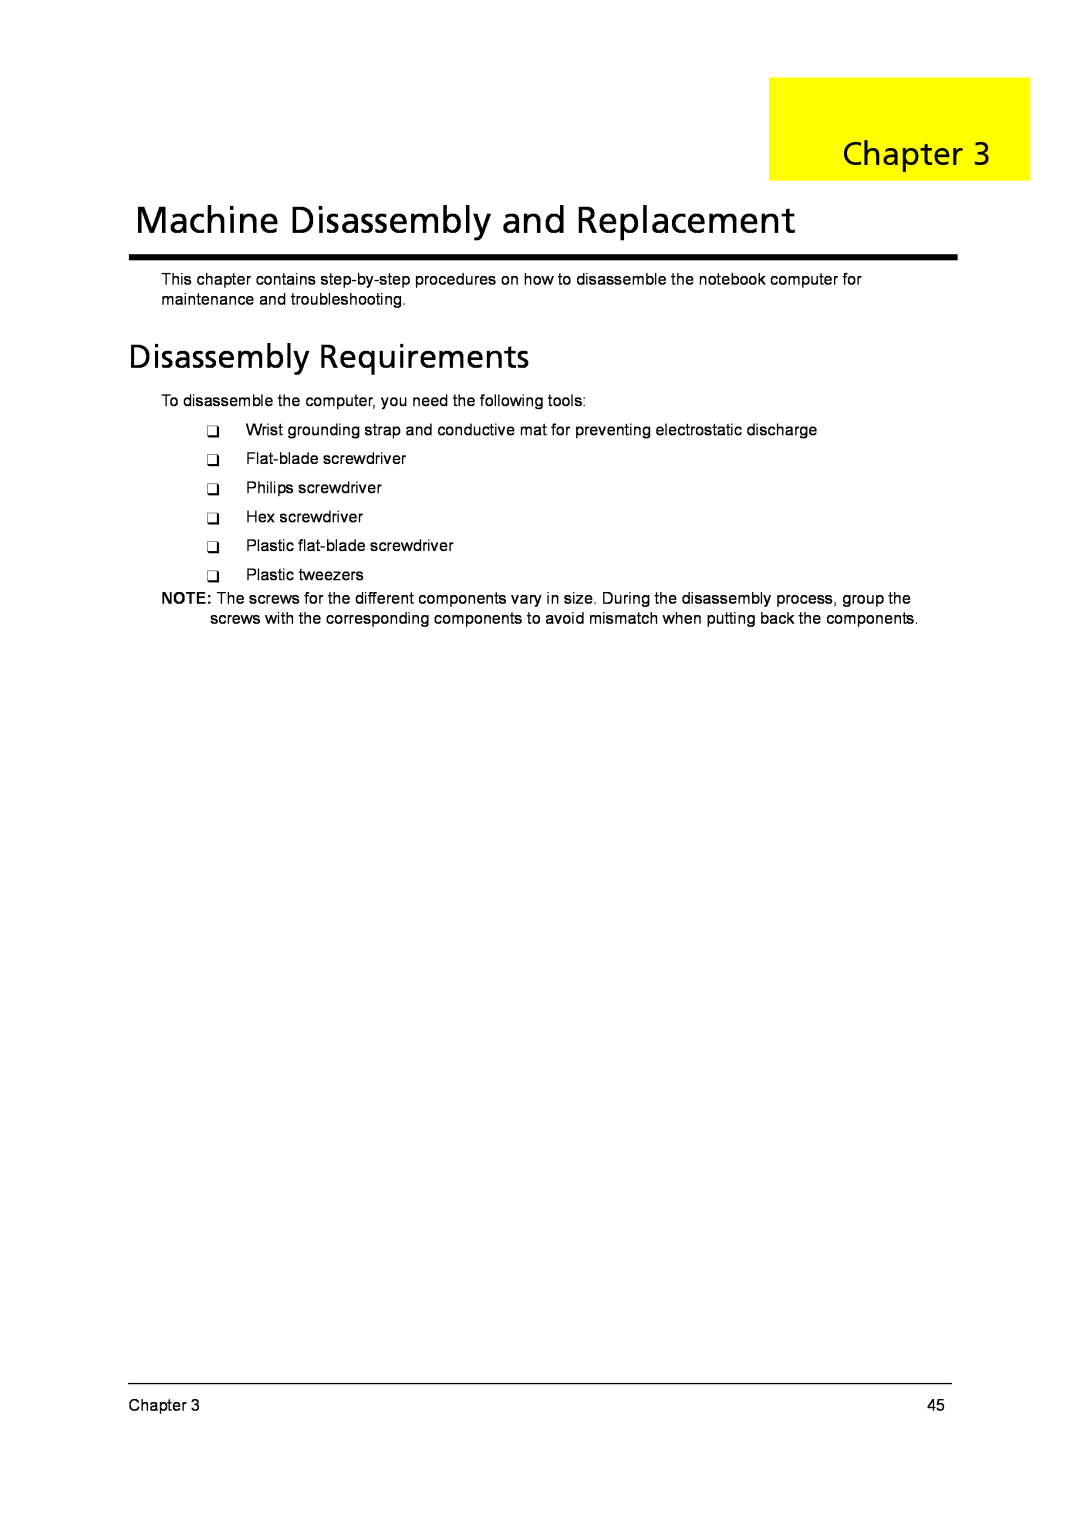 Acer 4315 manual Machine Disassembly and Replacement, Disassembly Requirements, Chapter 